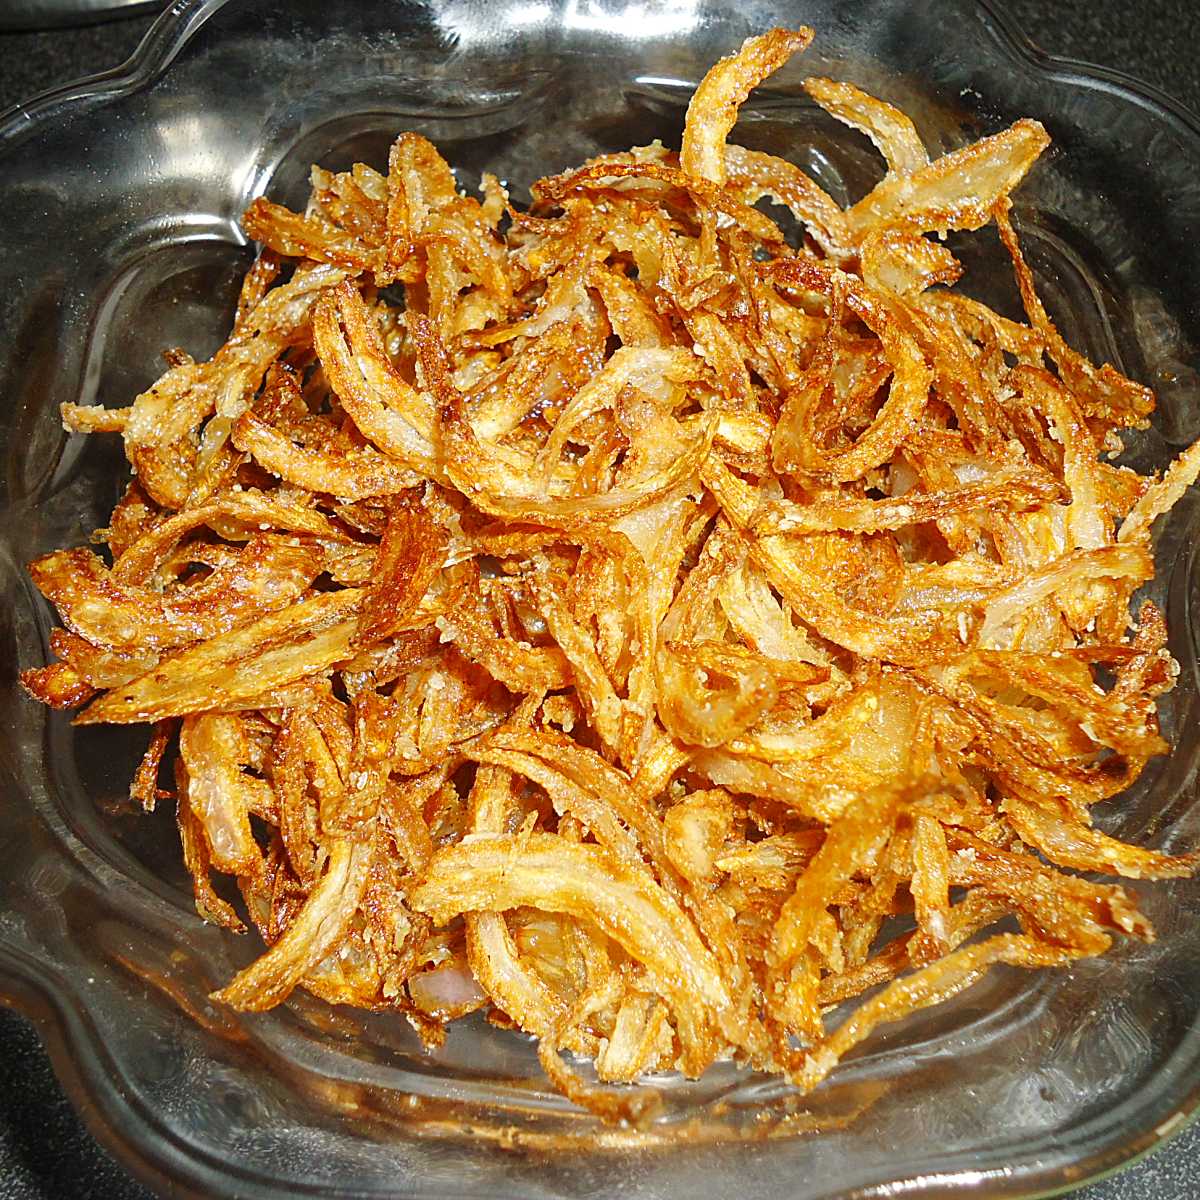 Best Fried Onions Recipe - How to Make Fried Onions